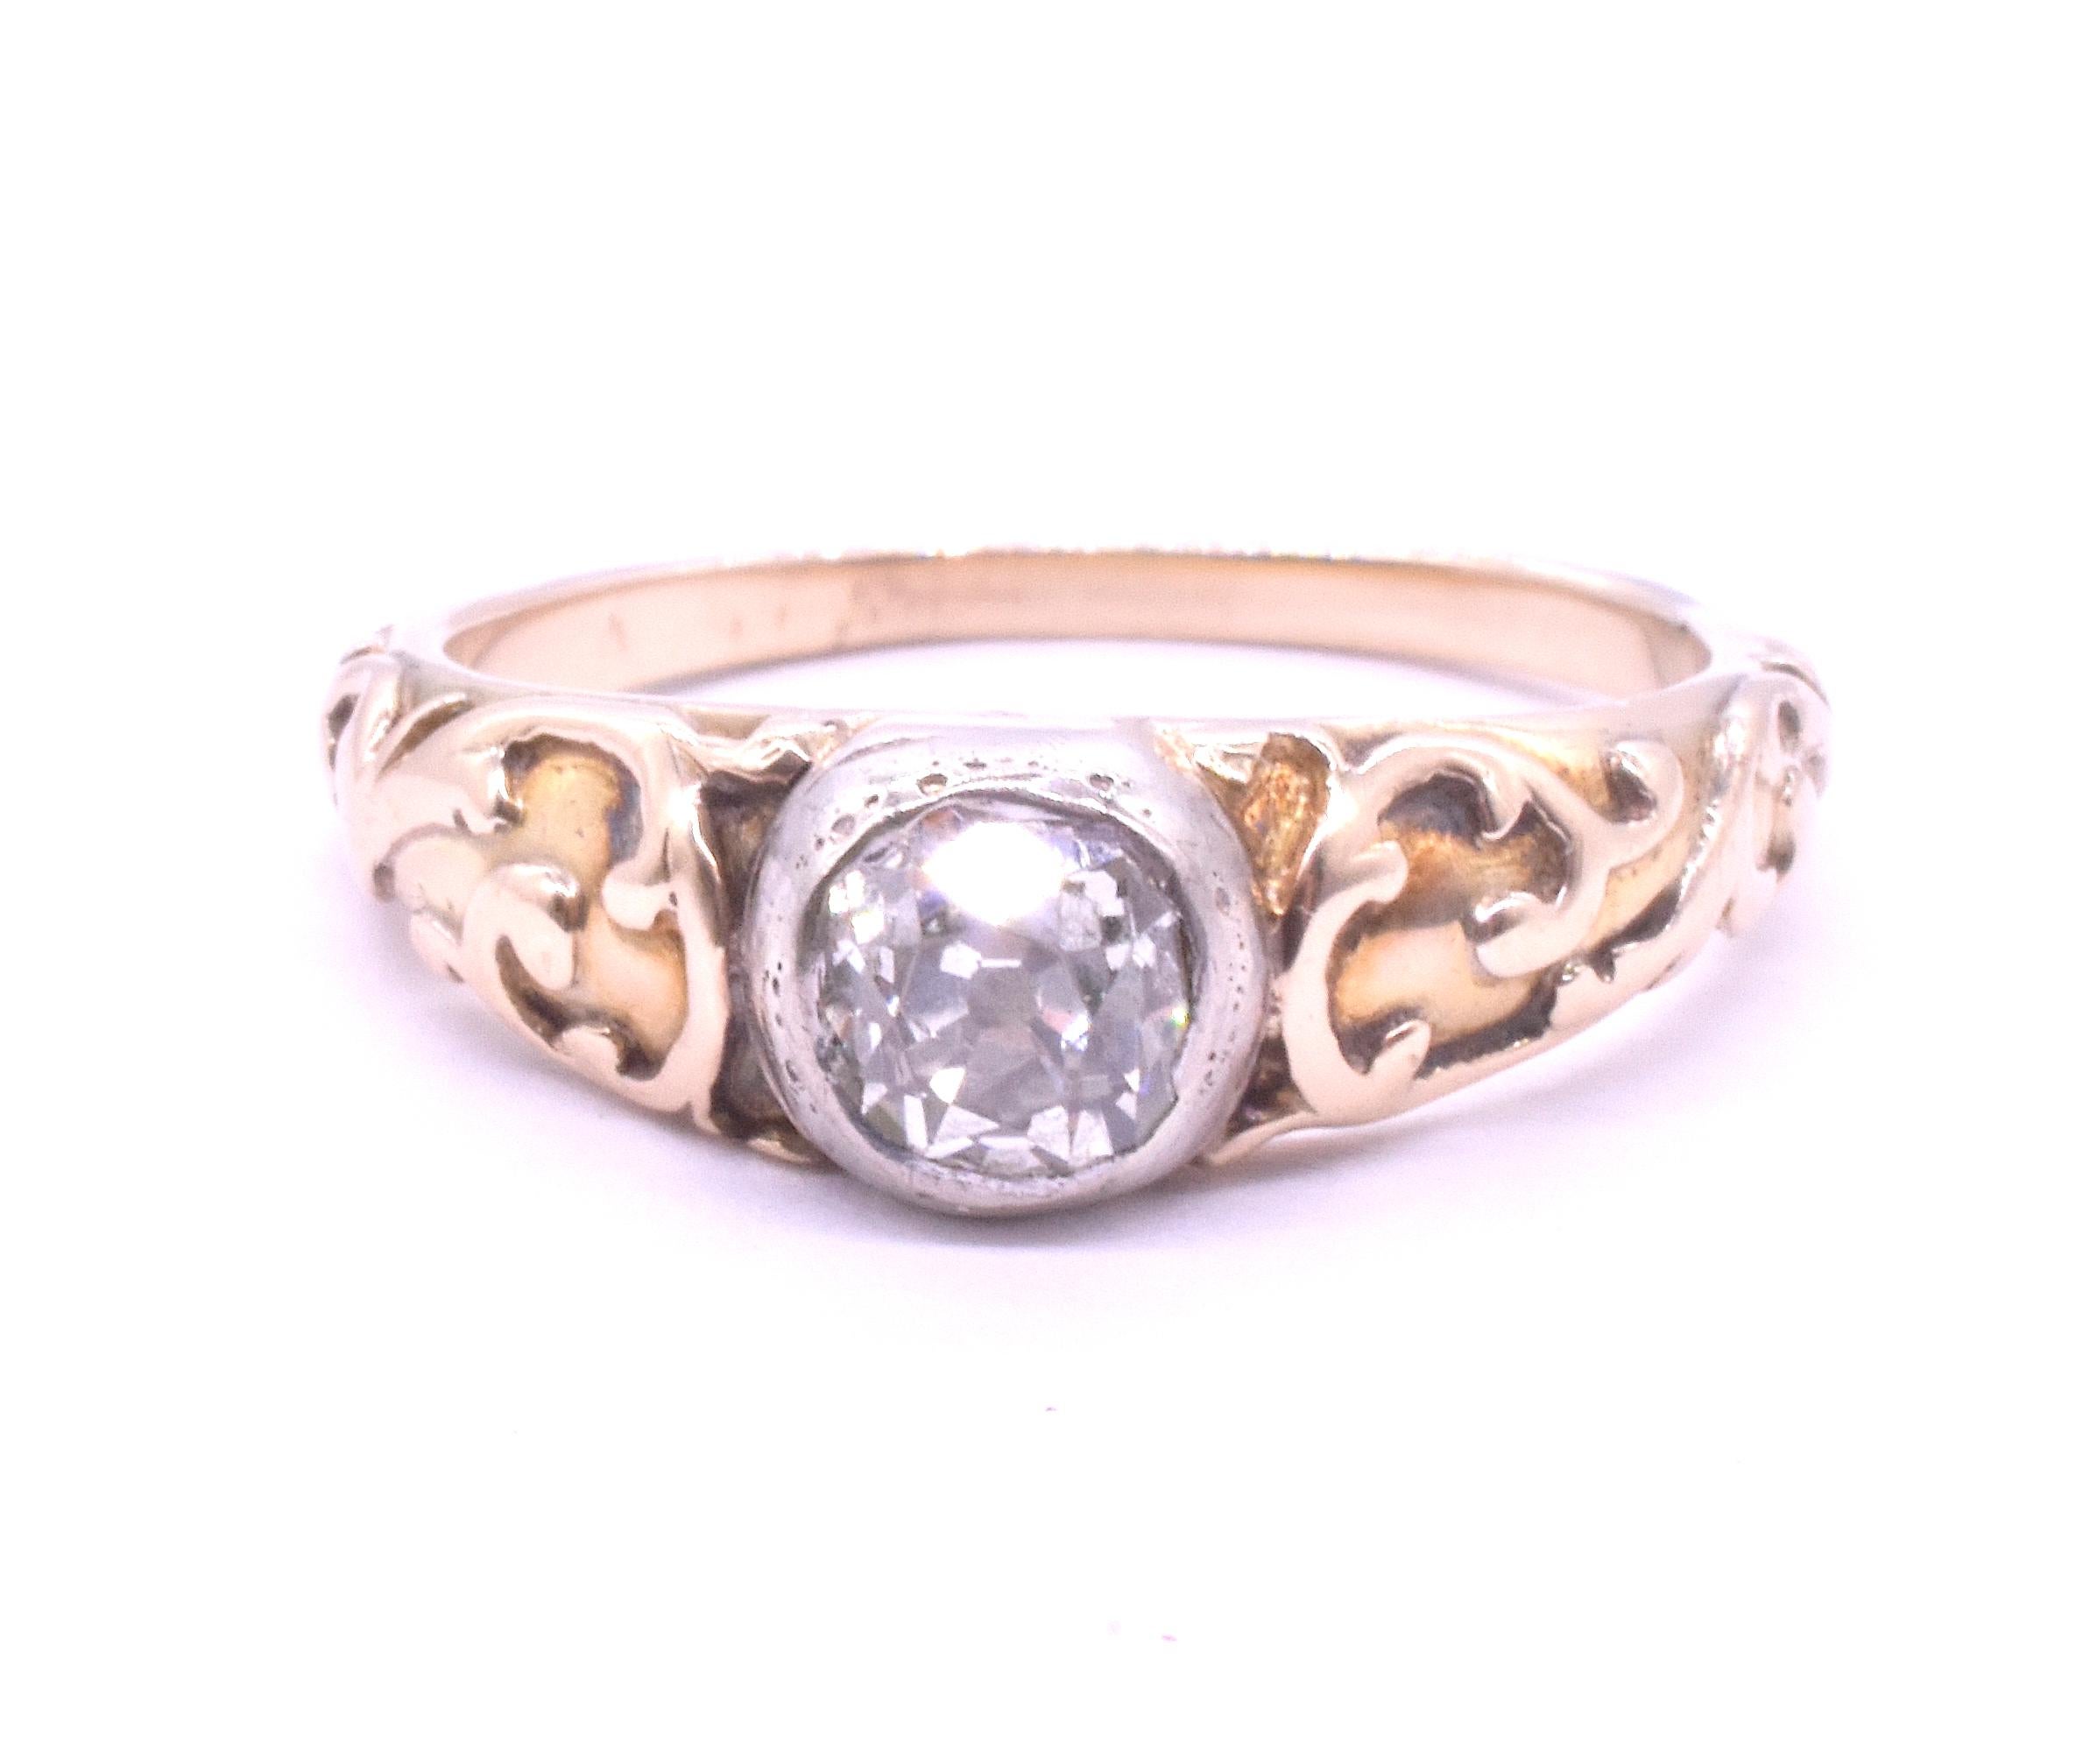 15K Georgian Period Diamond Solitaire Ring with Engraved Shoulders 4